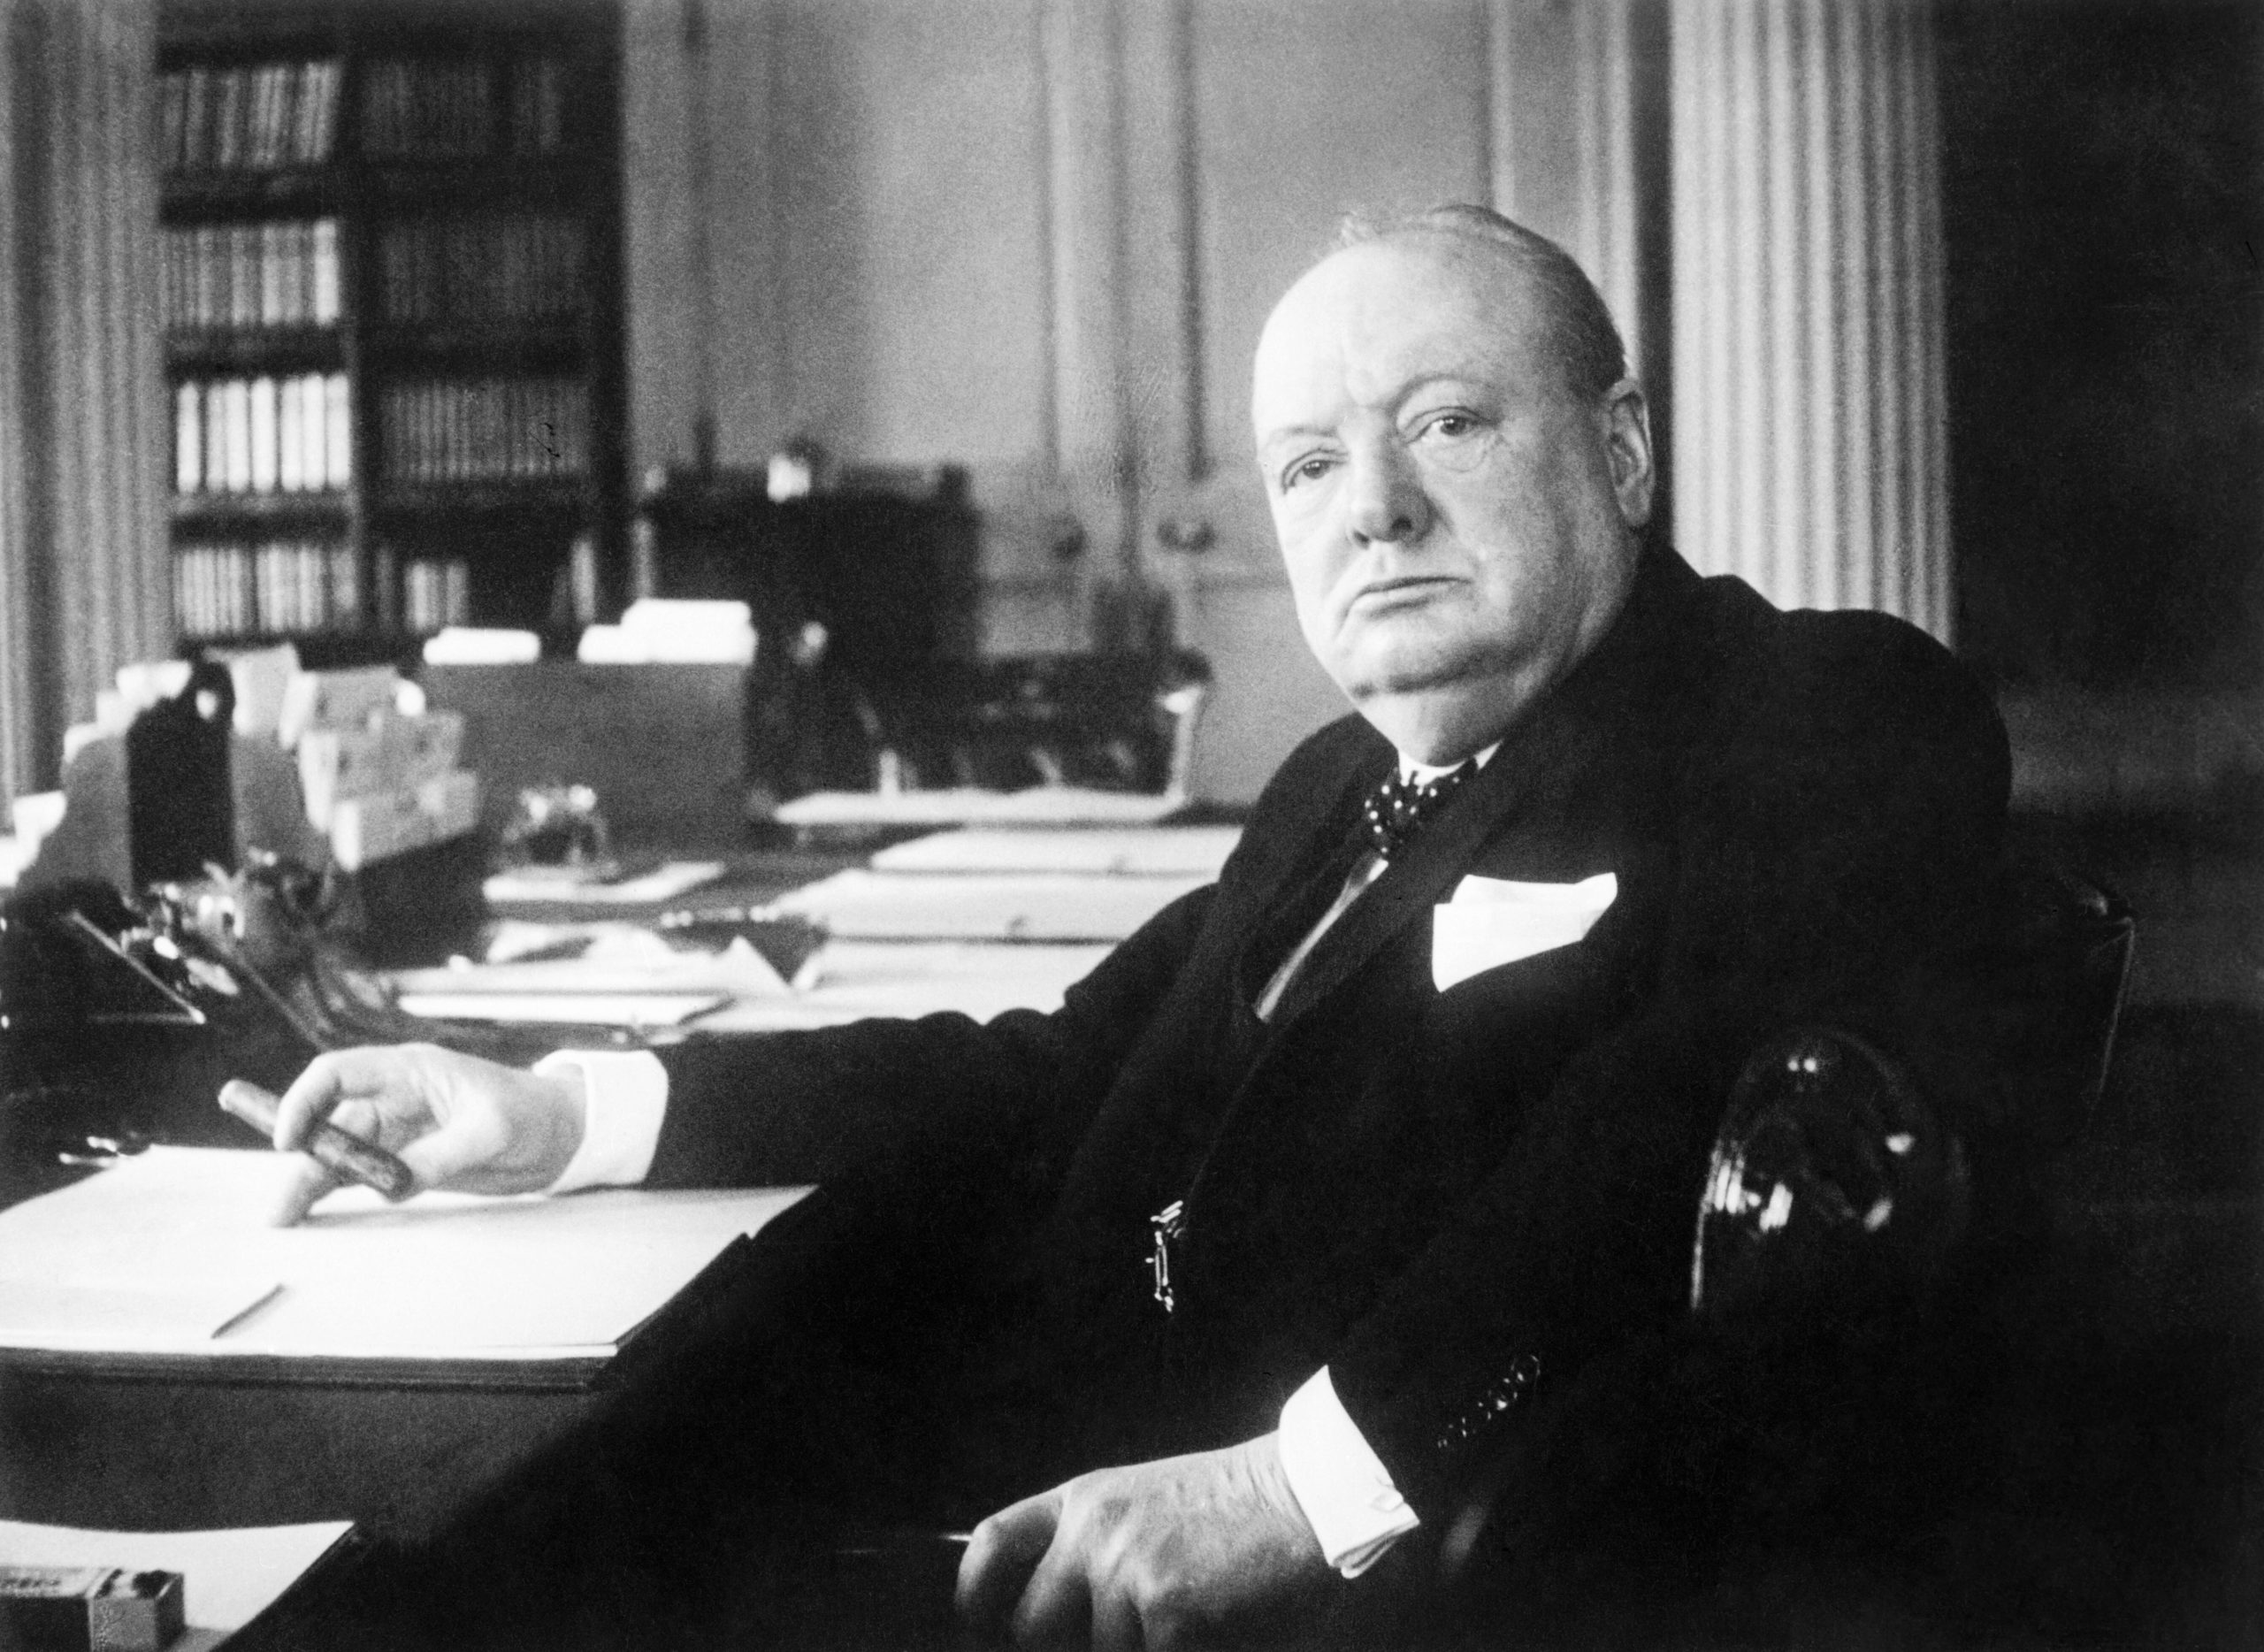 Last of the Whigs: Churchill as historian